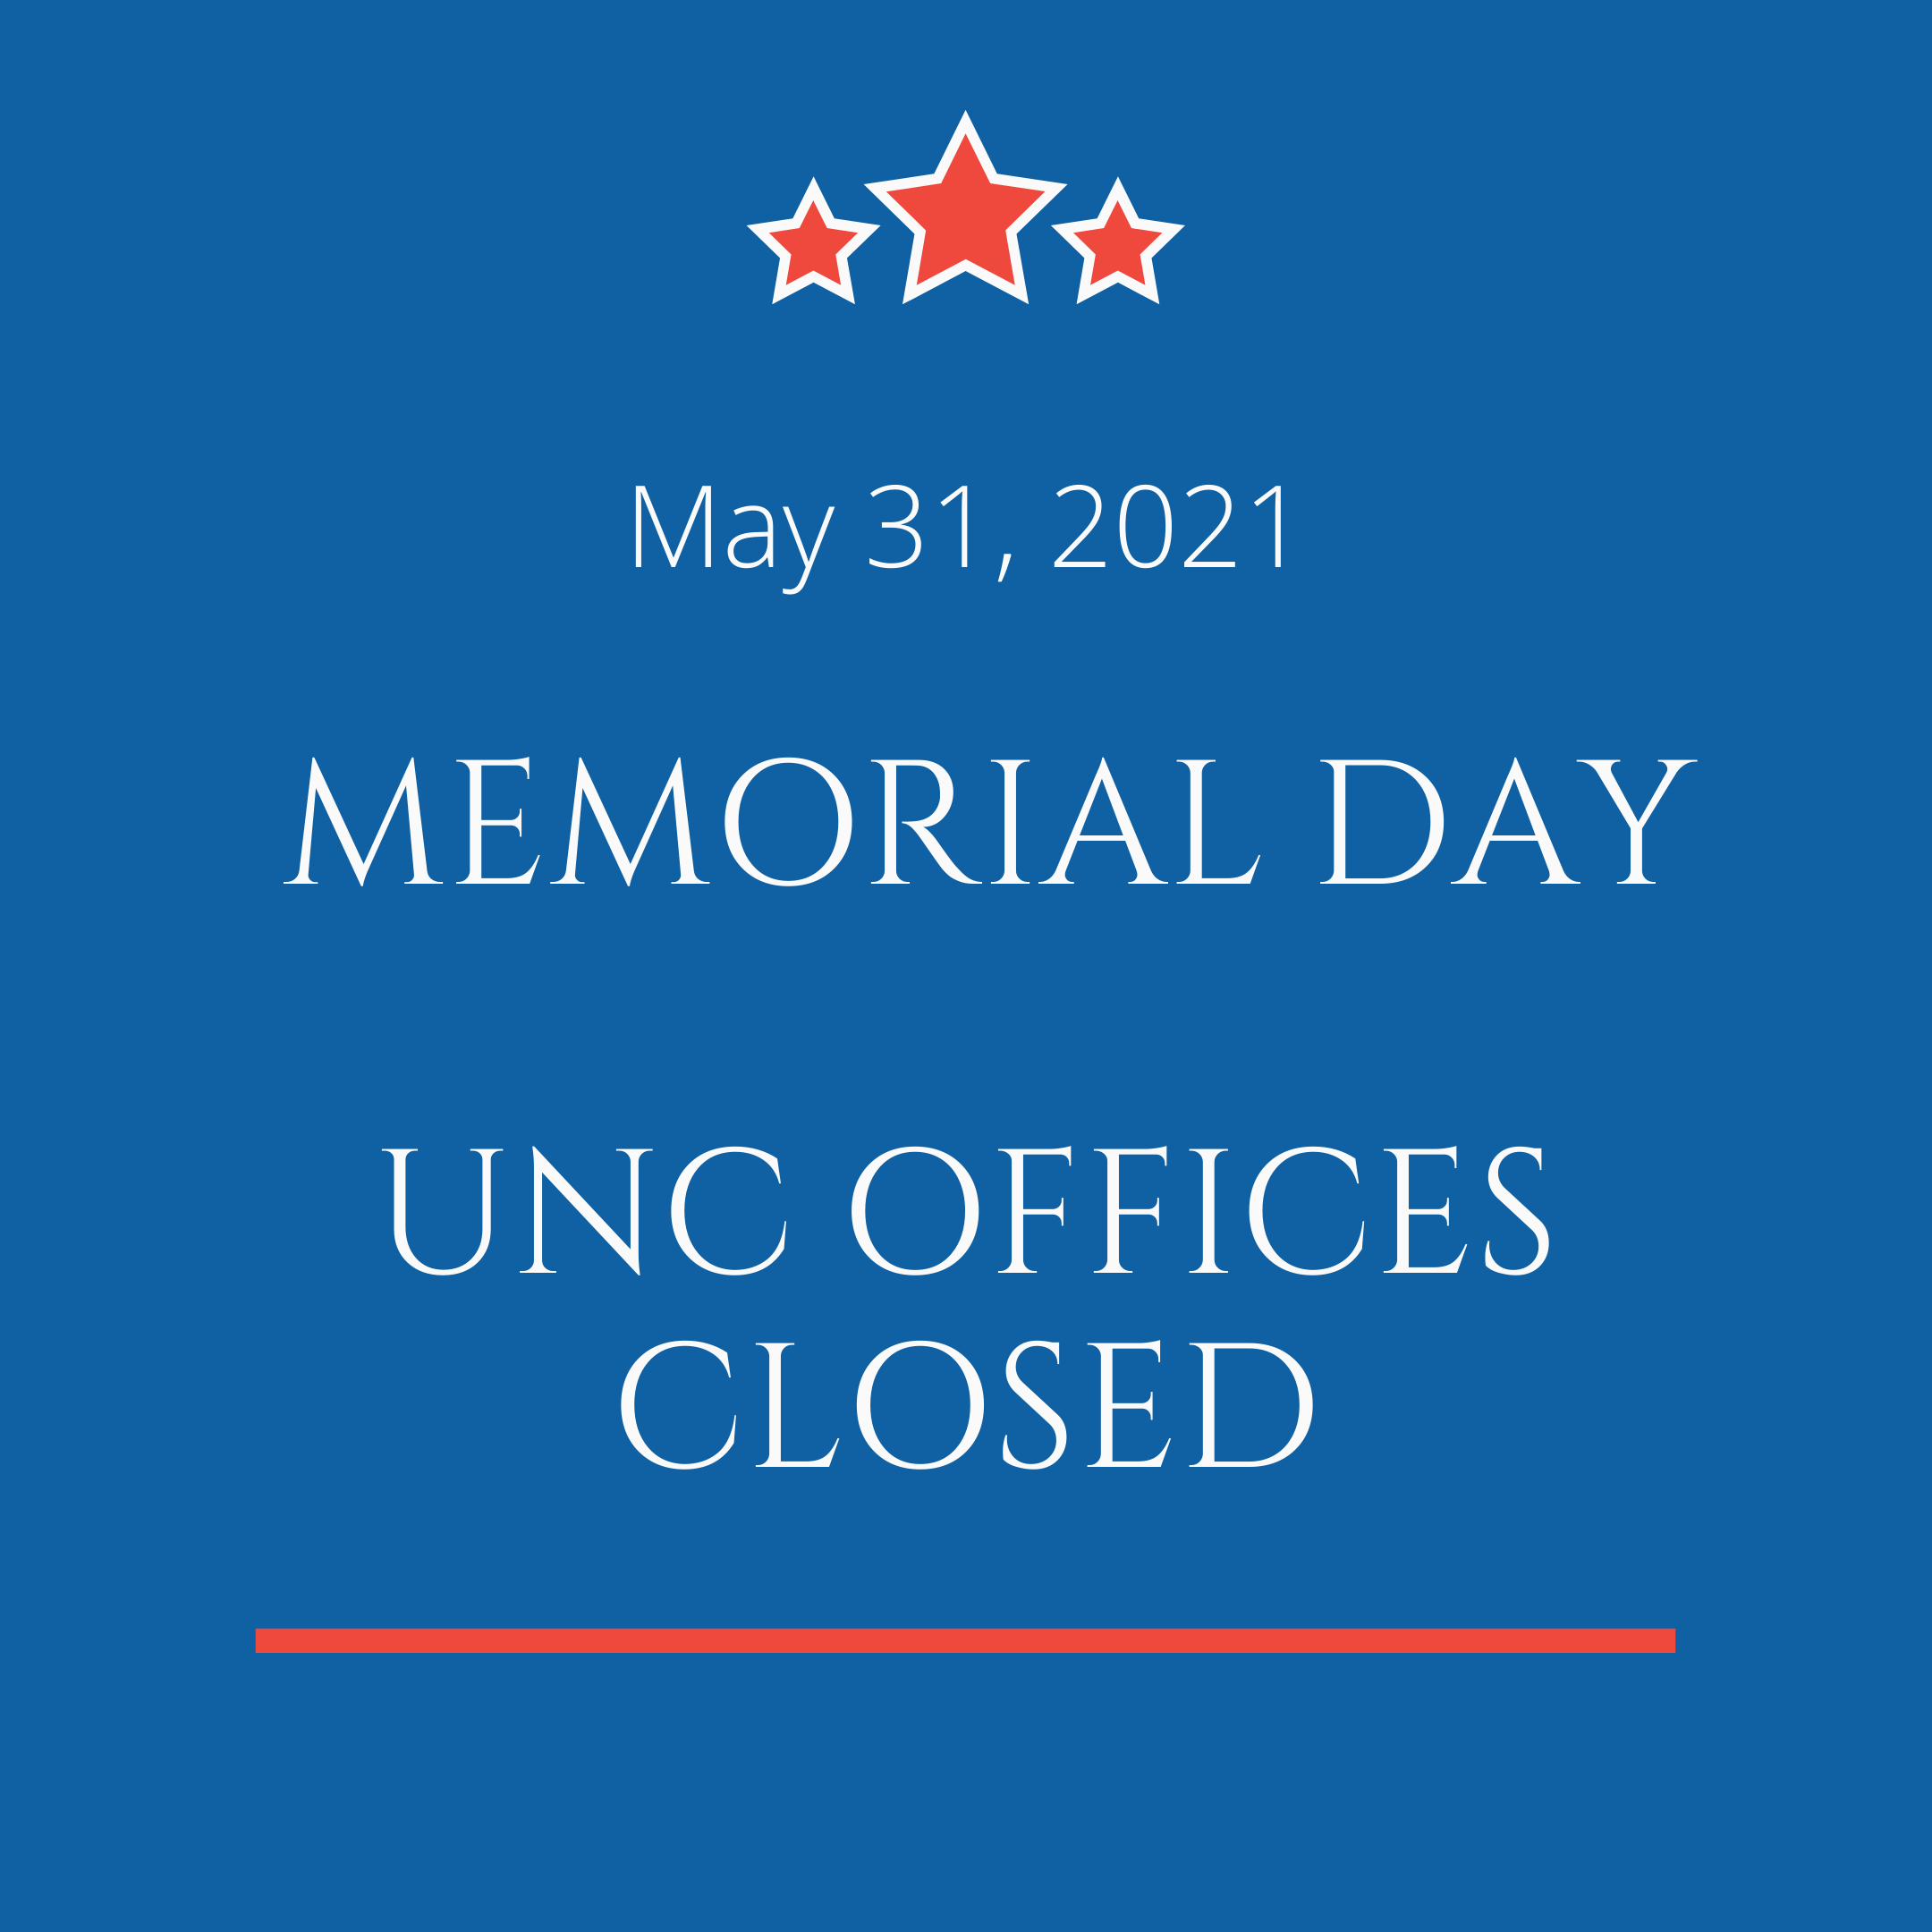 Memorial day is on May 31 2021 blue background UNC offices are closed three stars